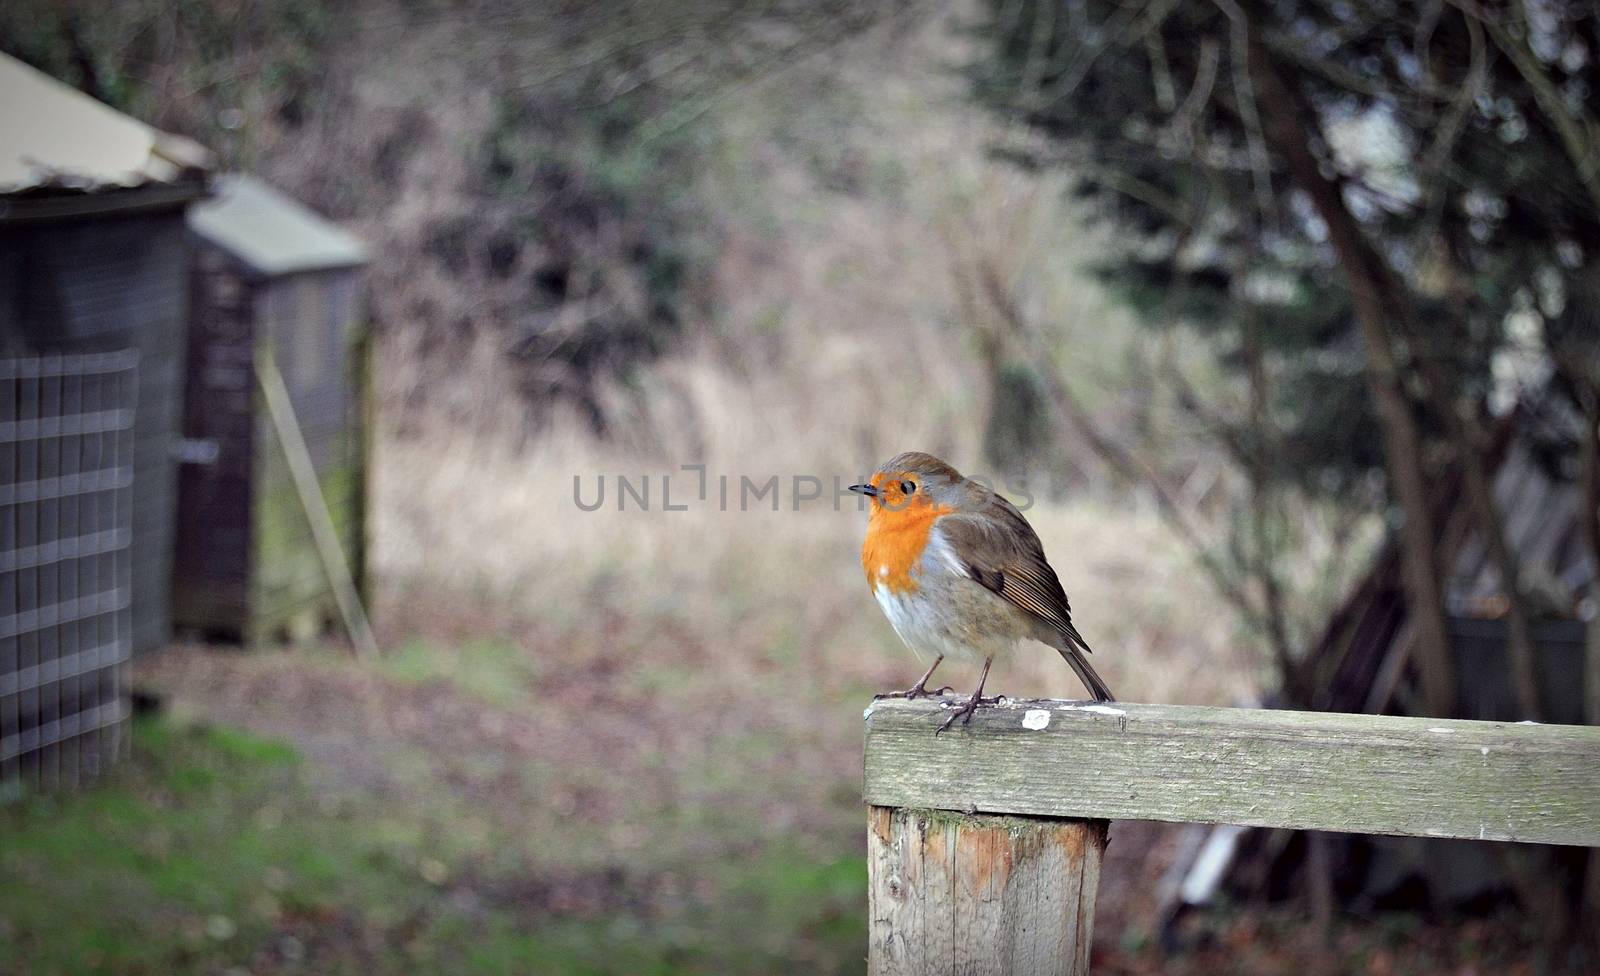 robin bird perched on a fence in its natural habitat by sirspread